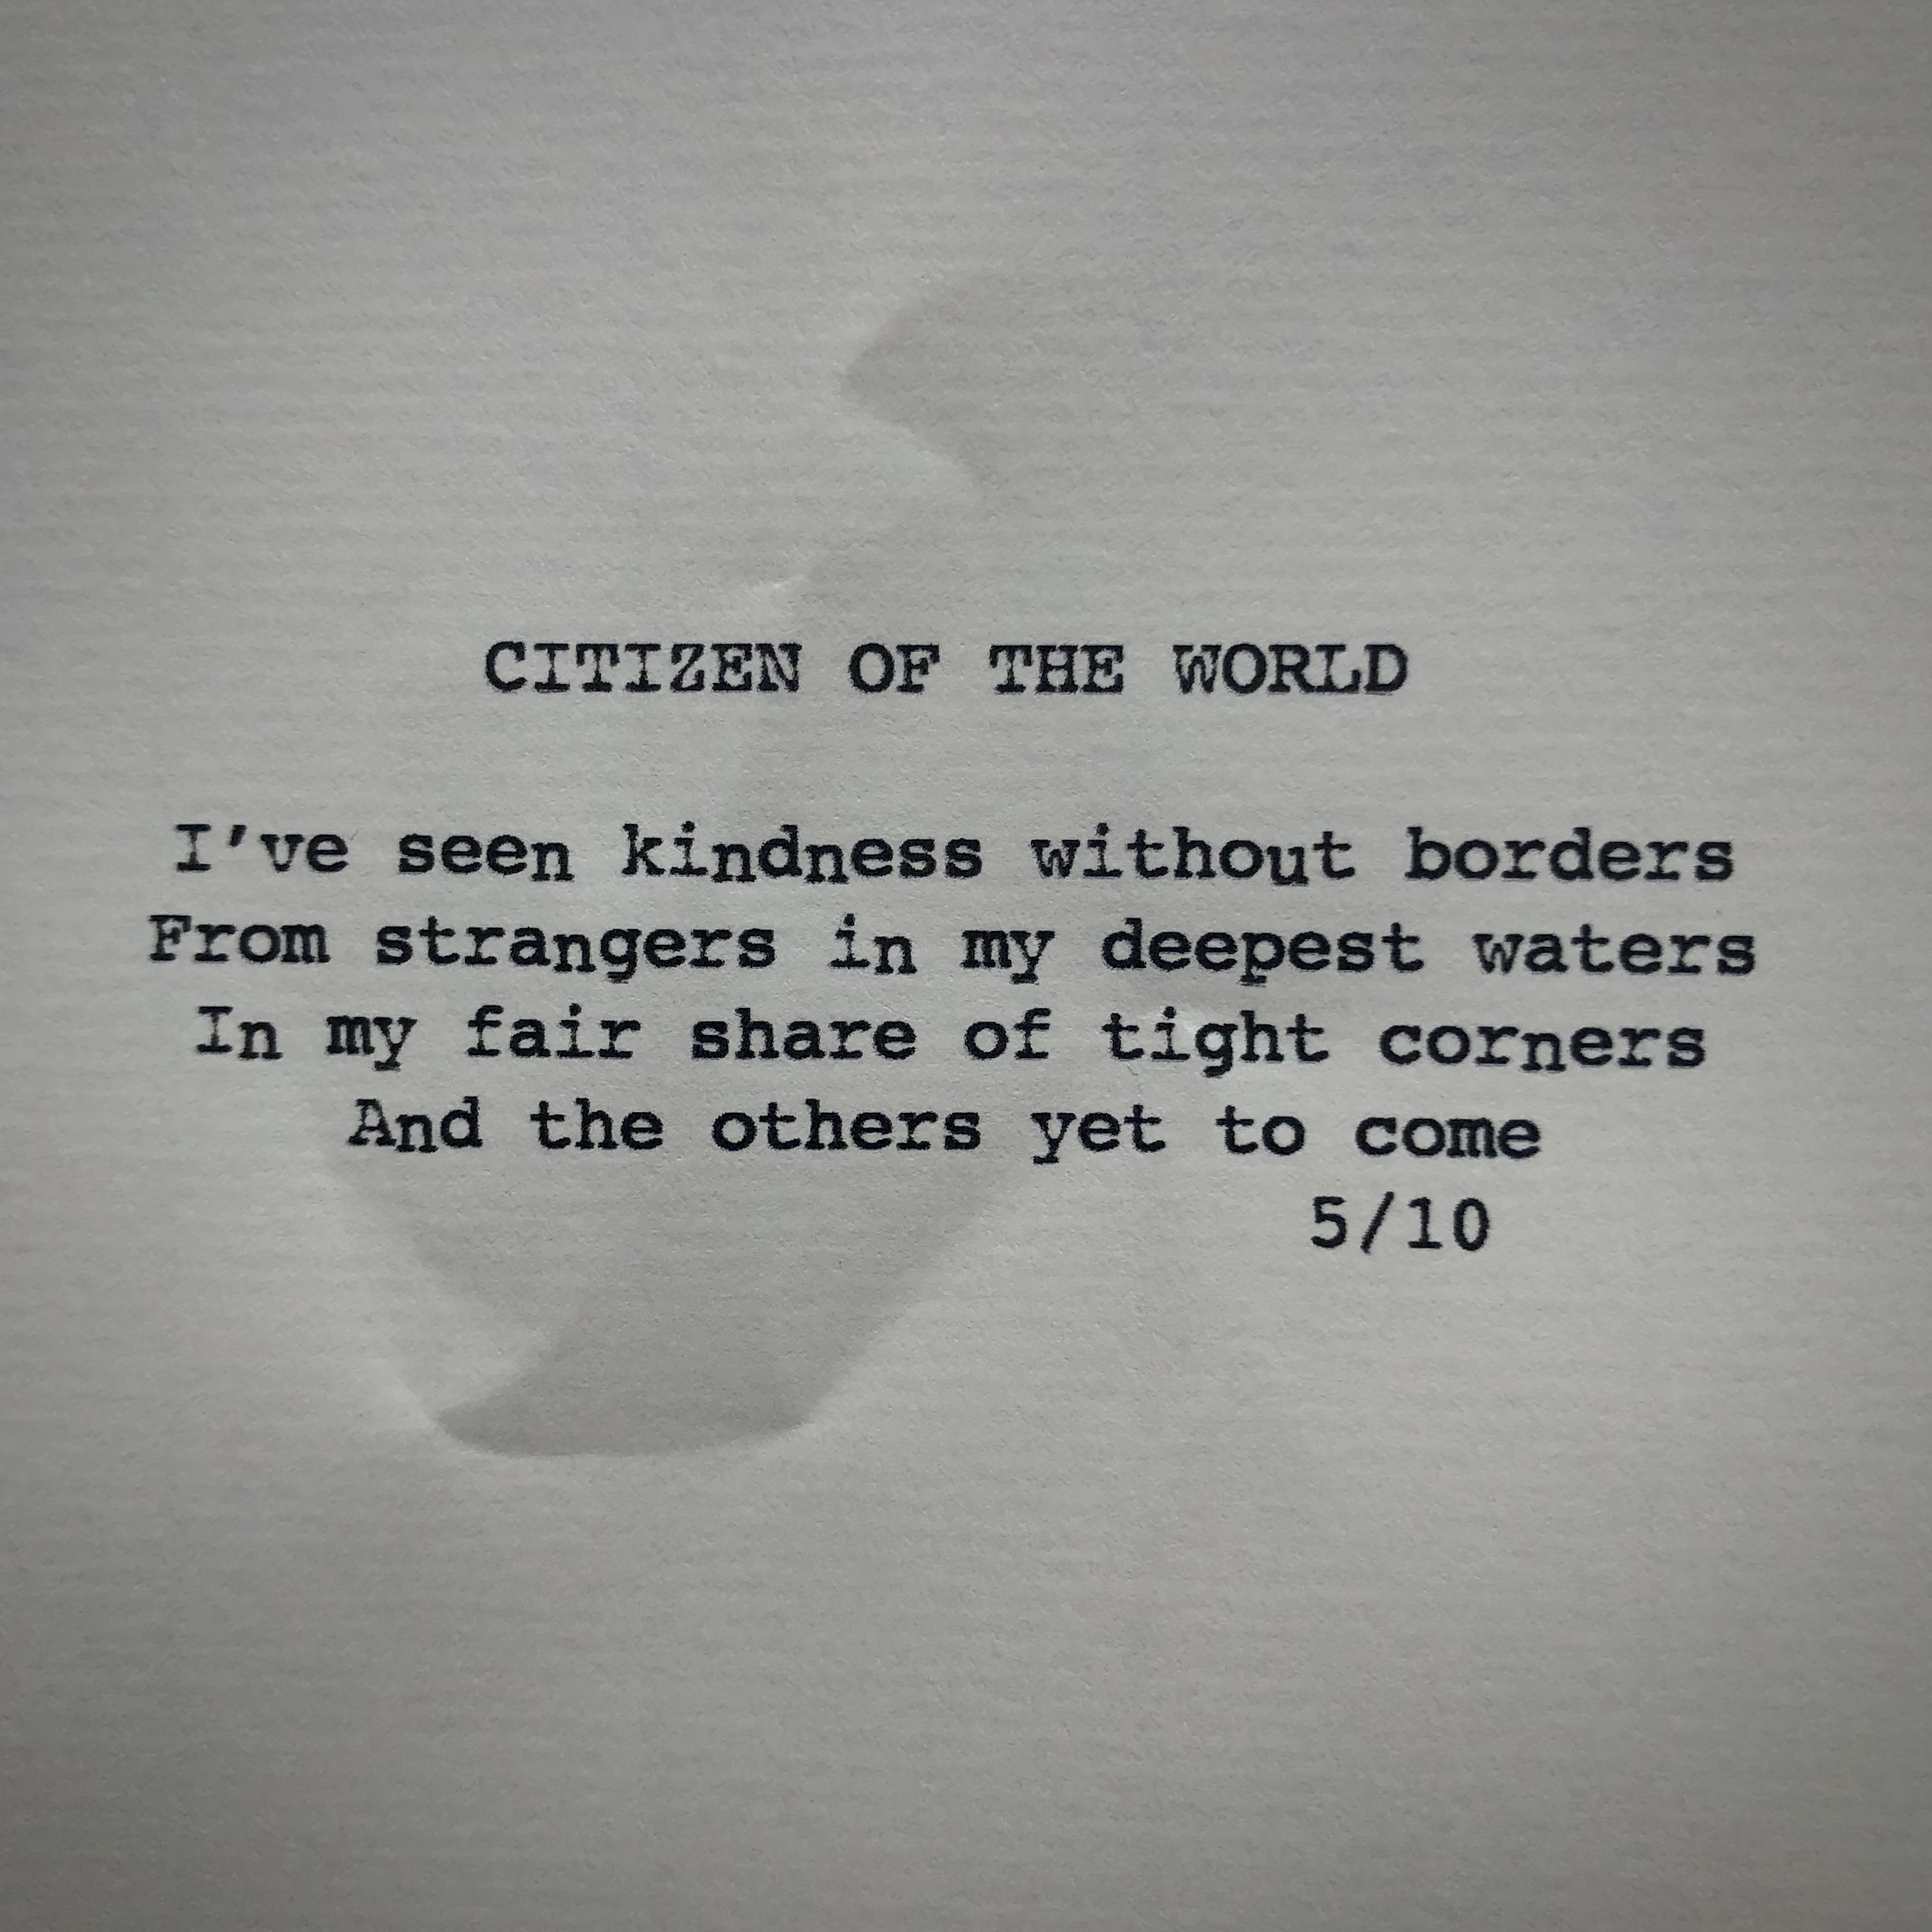 Citizen Of The World #5